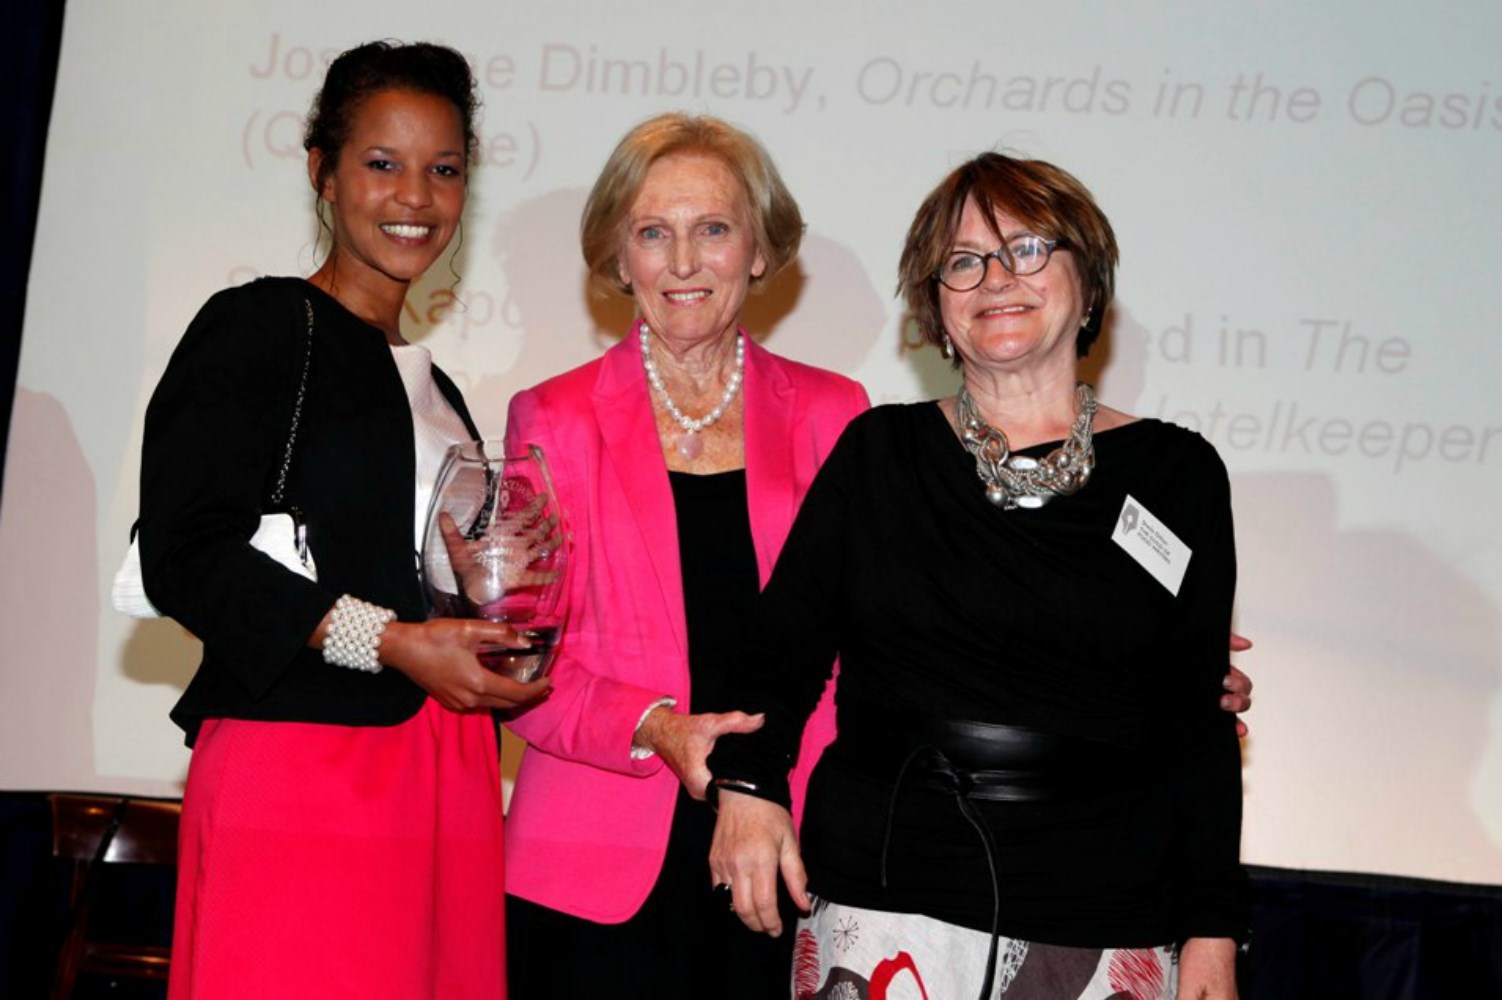 Deiniol Buxton (left) and Sheila Dillon (right) accepting the Derek Cooper Award for Campaigning and Investigative Food Writing or Broadcasting from Mary Berry